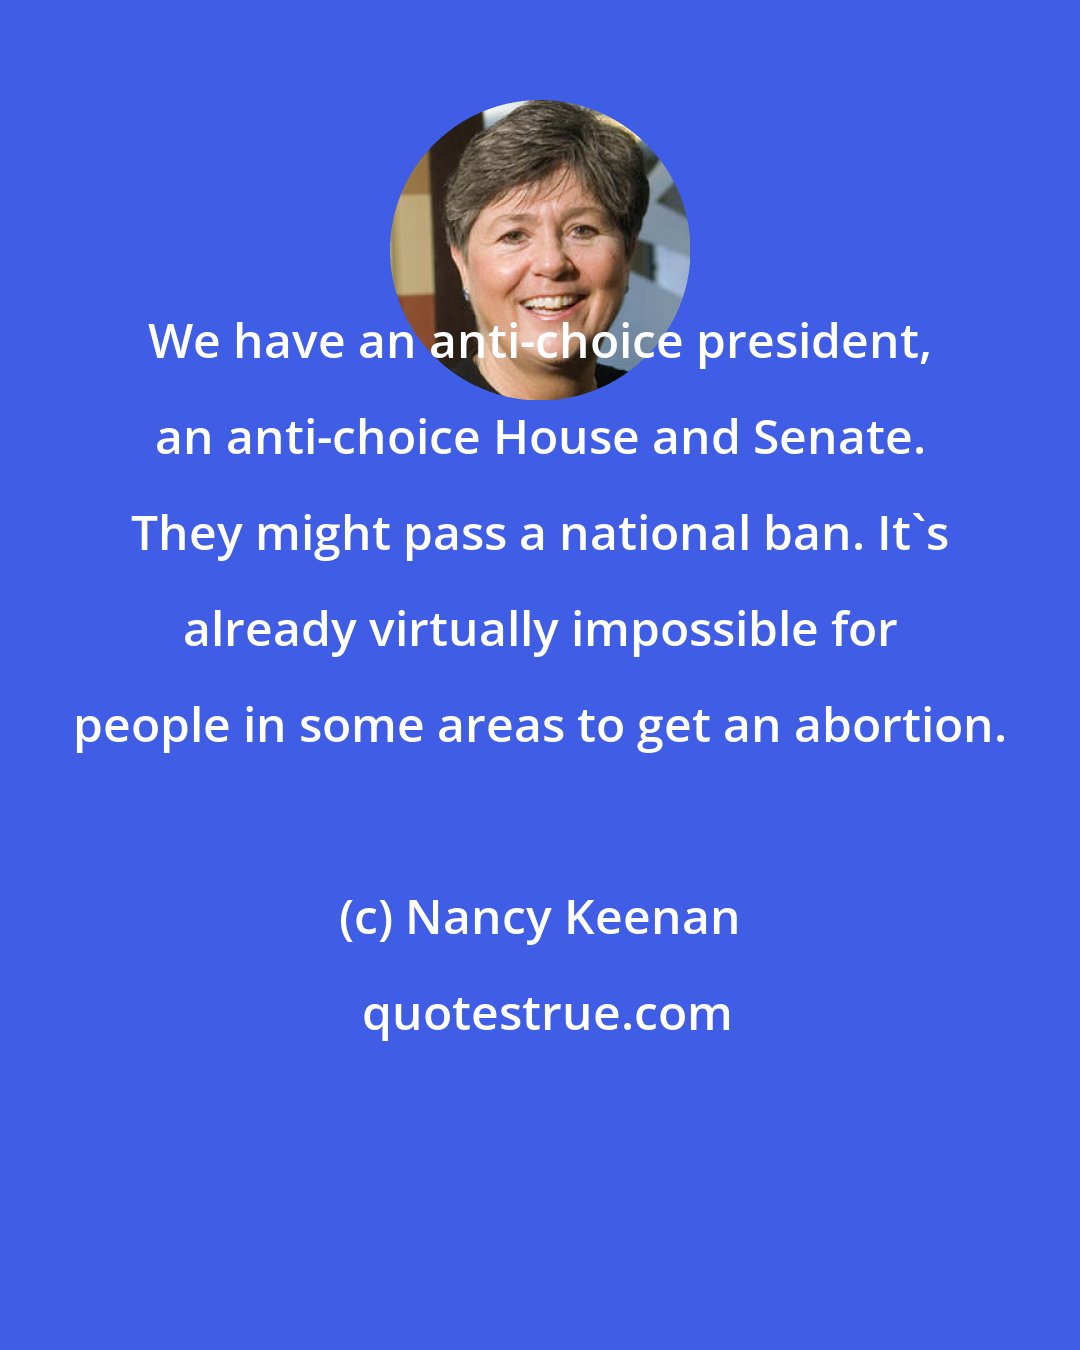 Nancy Keenan: We have an anti-choice president, an anti-choice House and Senate. They might pass a national ban. It's already virtually impossible for people in some areas to get an abortion.